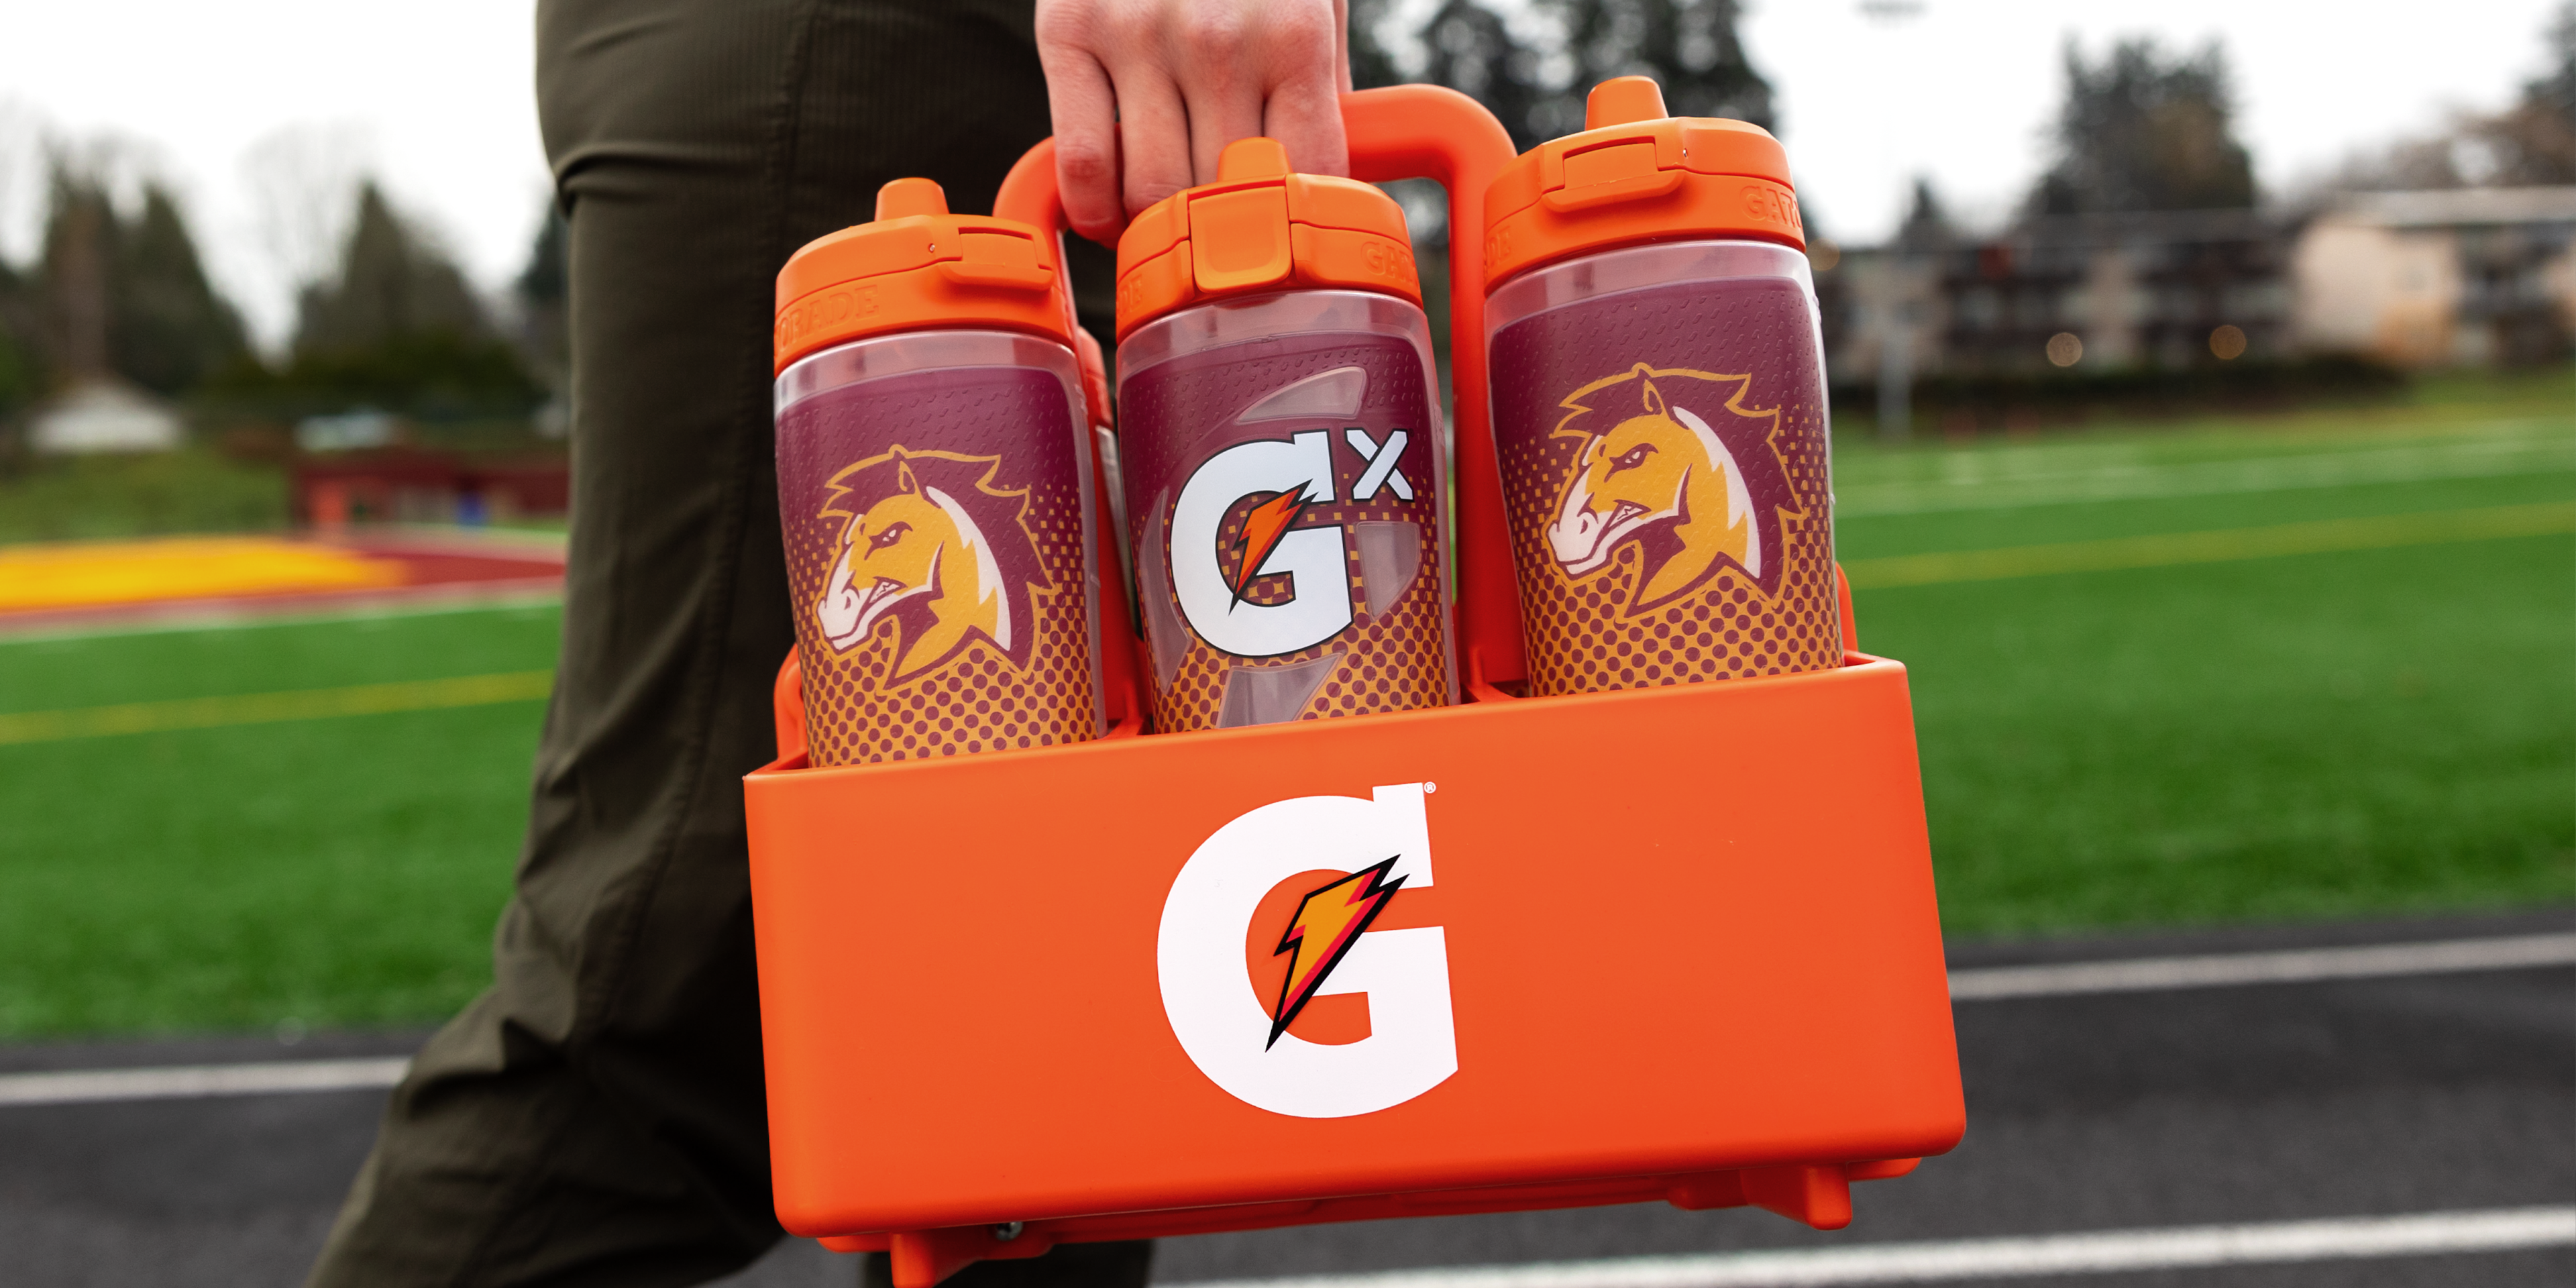 Fully customizable bottles with horse mascot